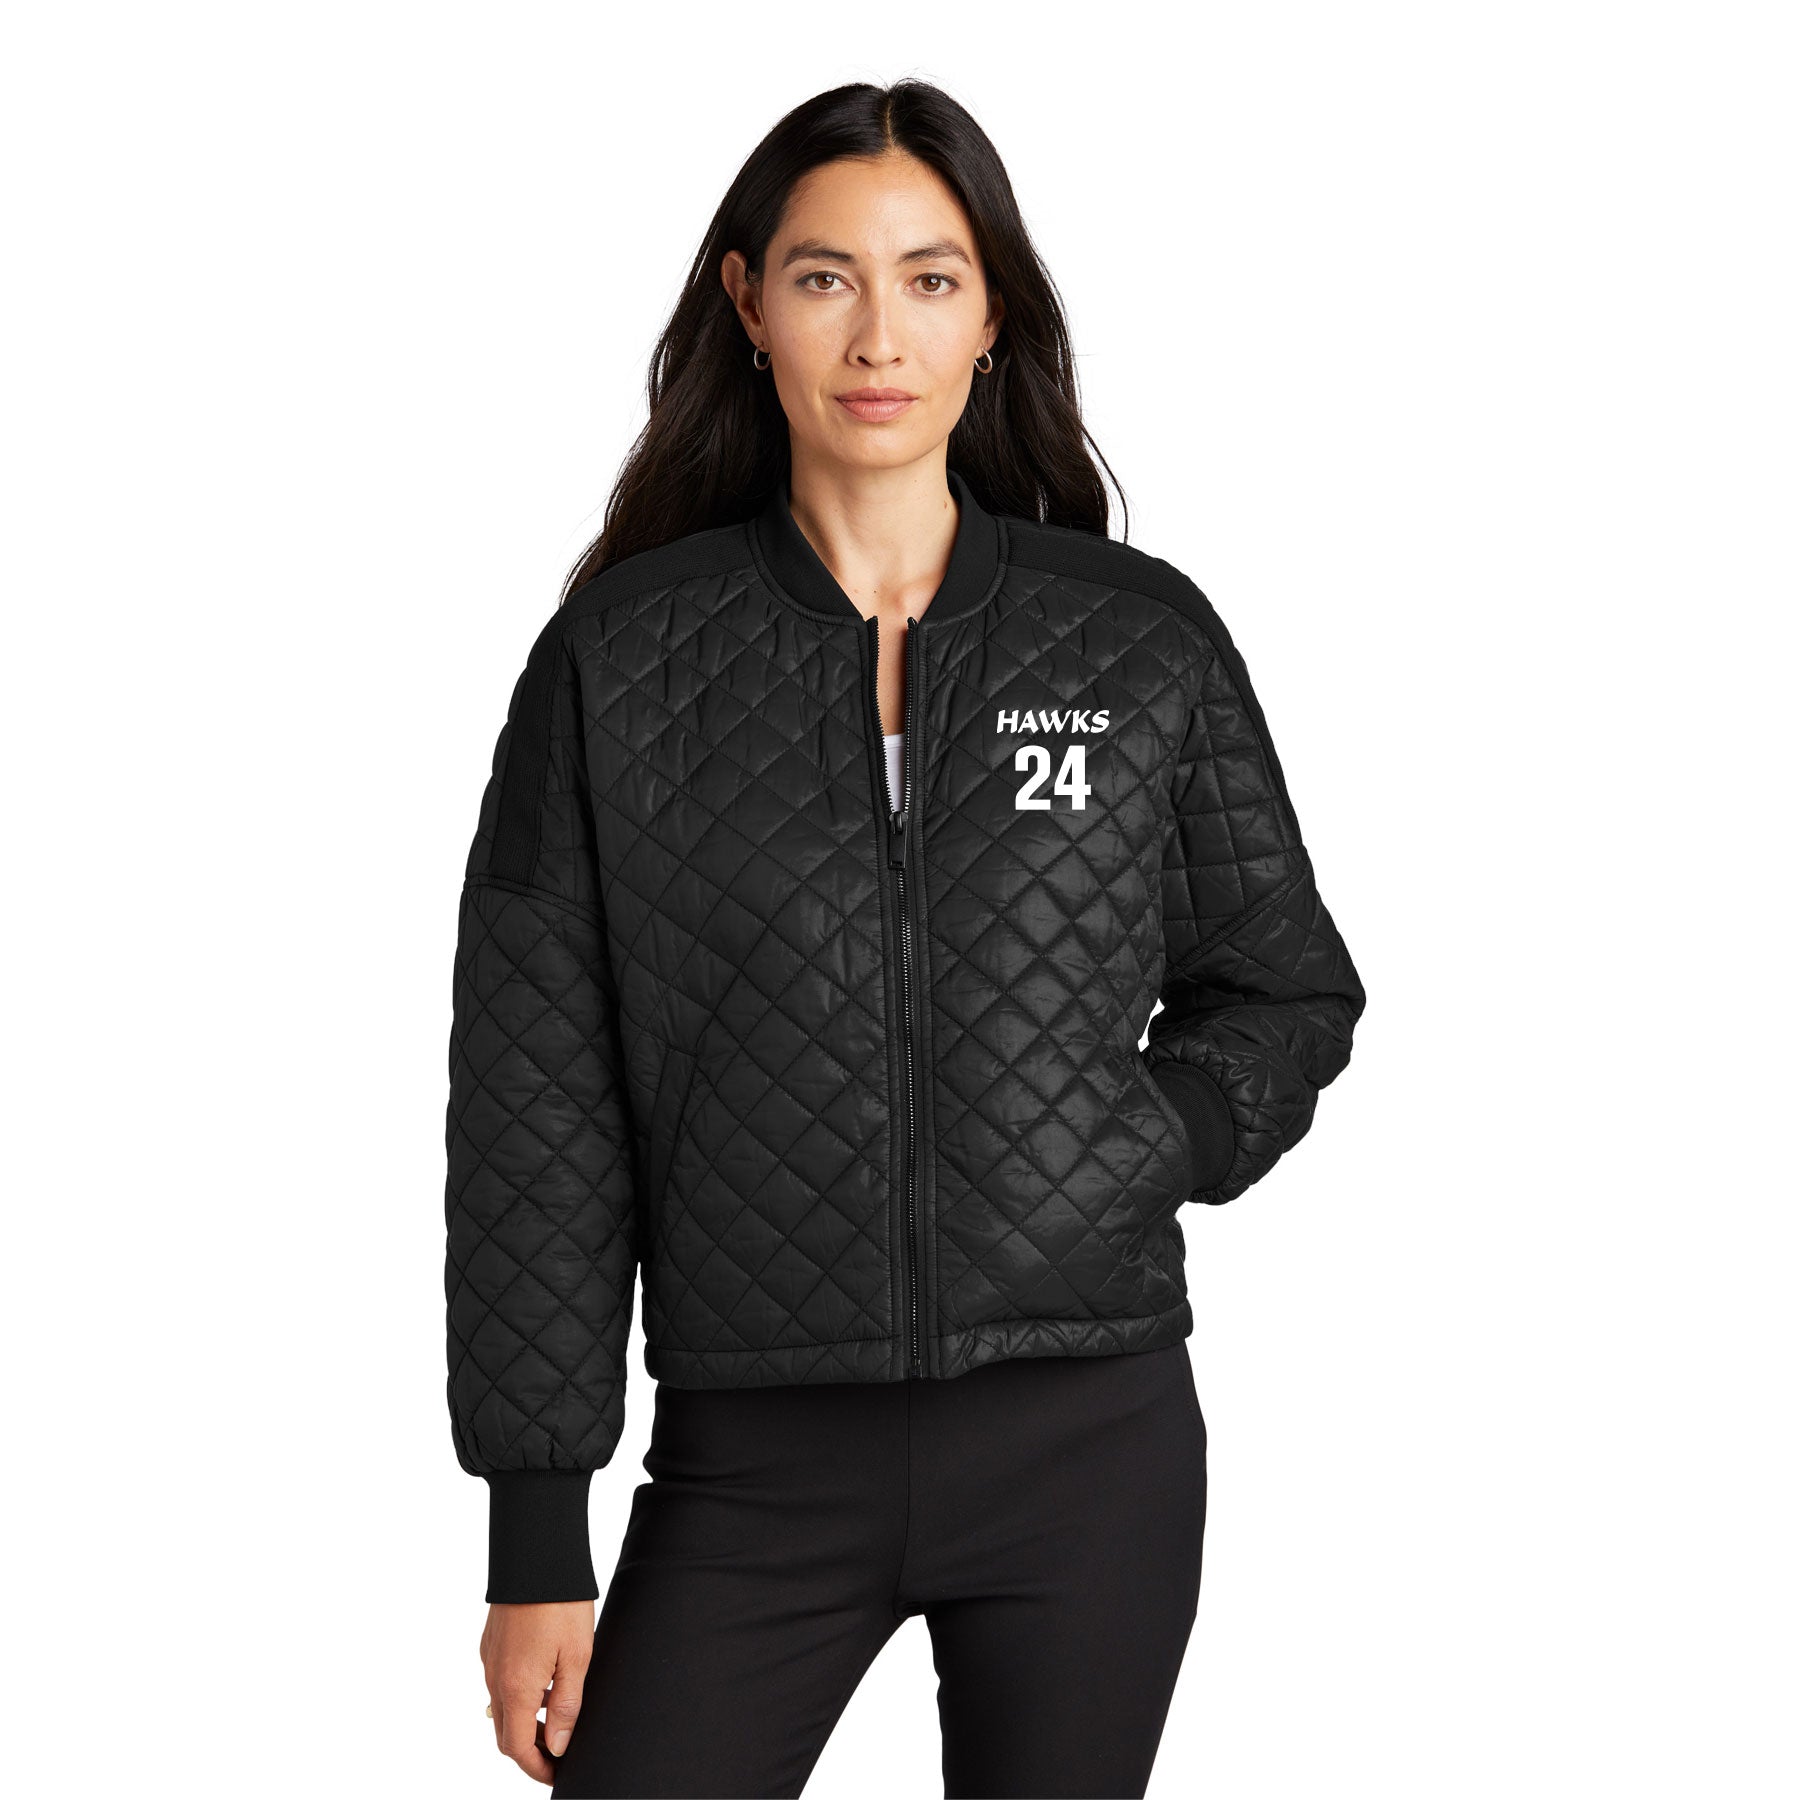 HAWKS BASEBALL LEFT CHEST EMBROIDERY MERCER+METTLEª WOMENÕS BOXY QUILTED JACKET